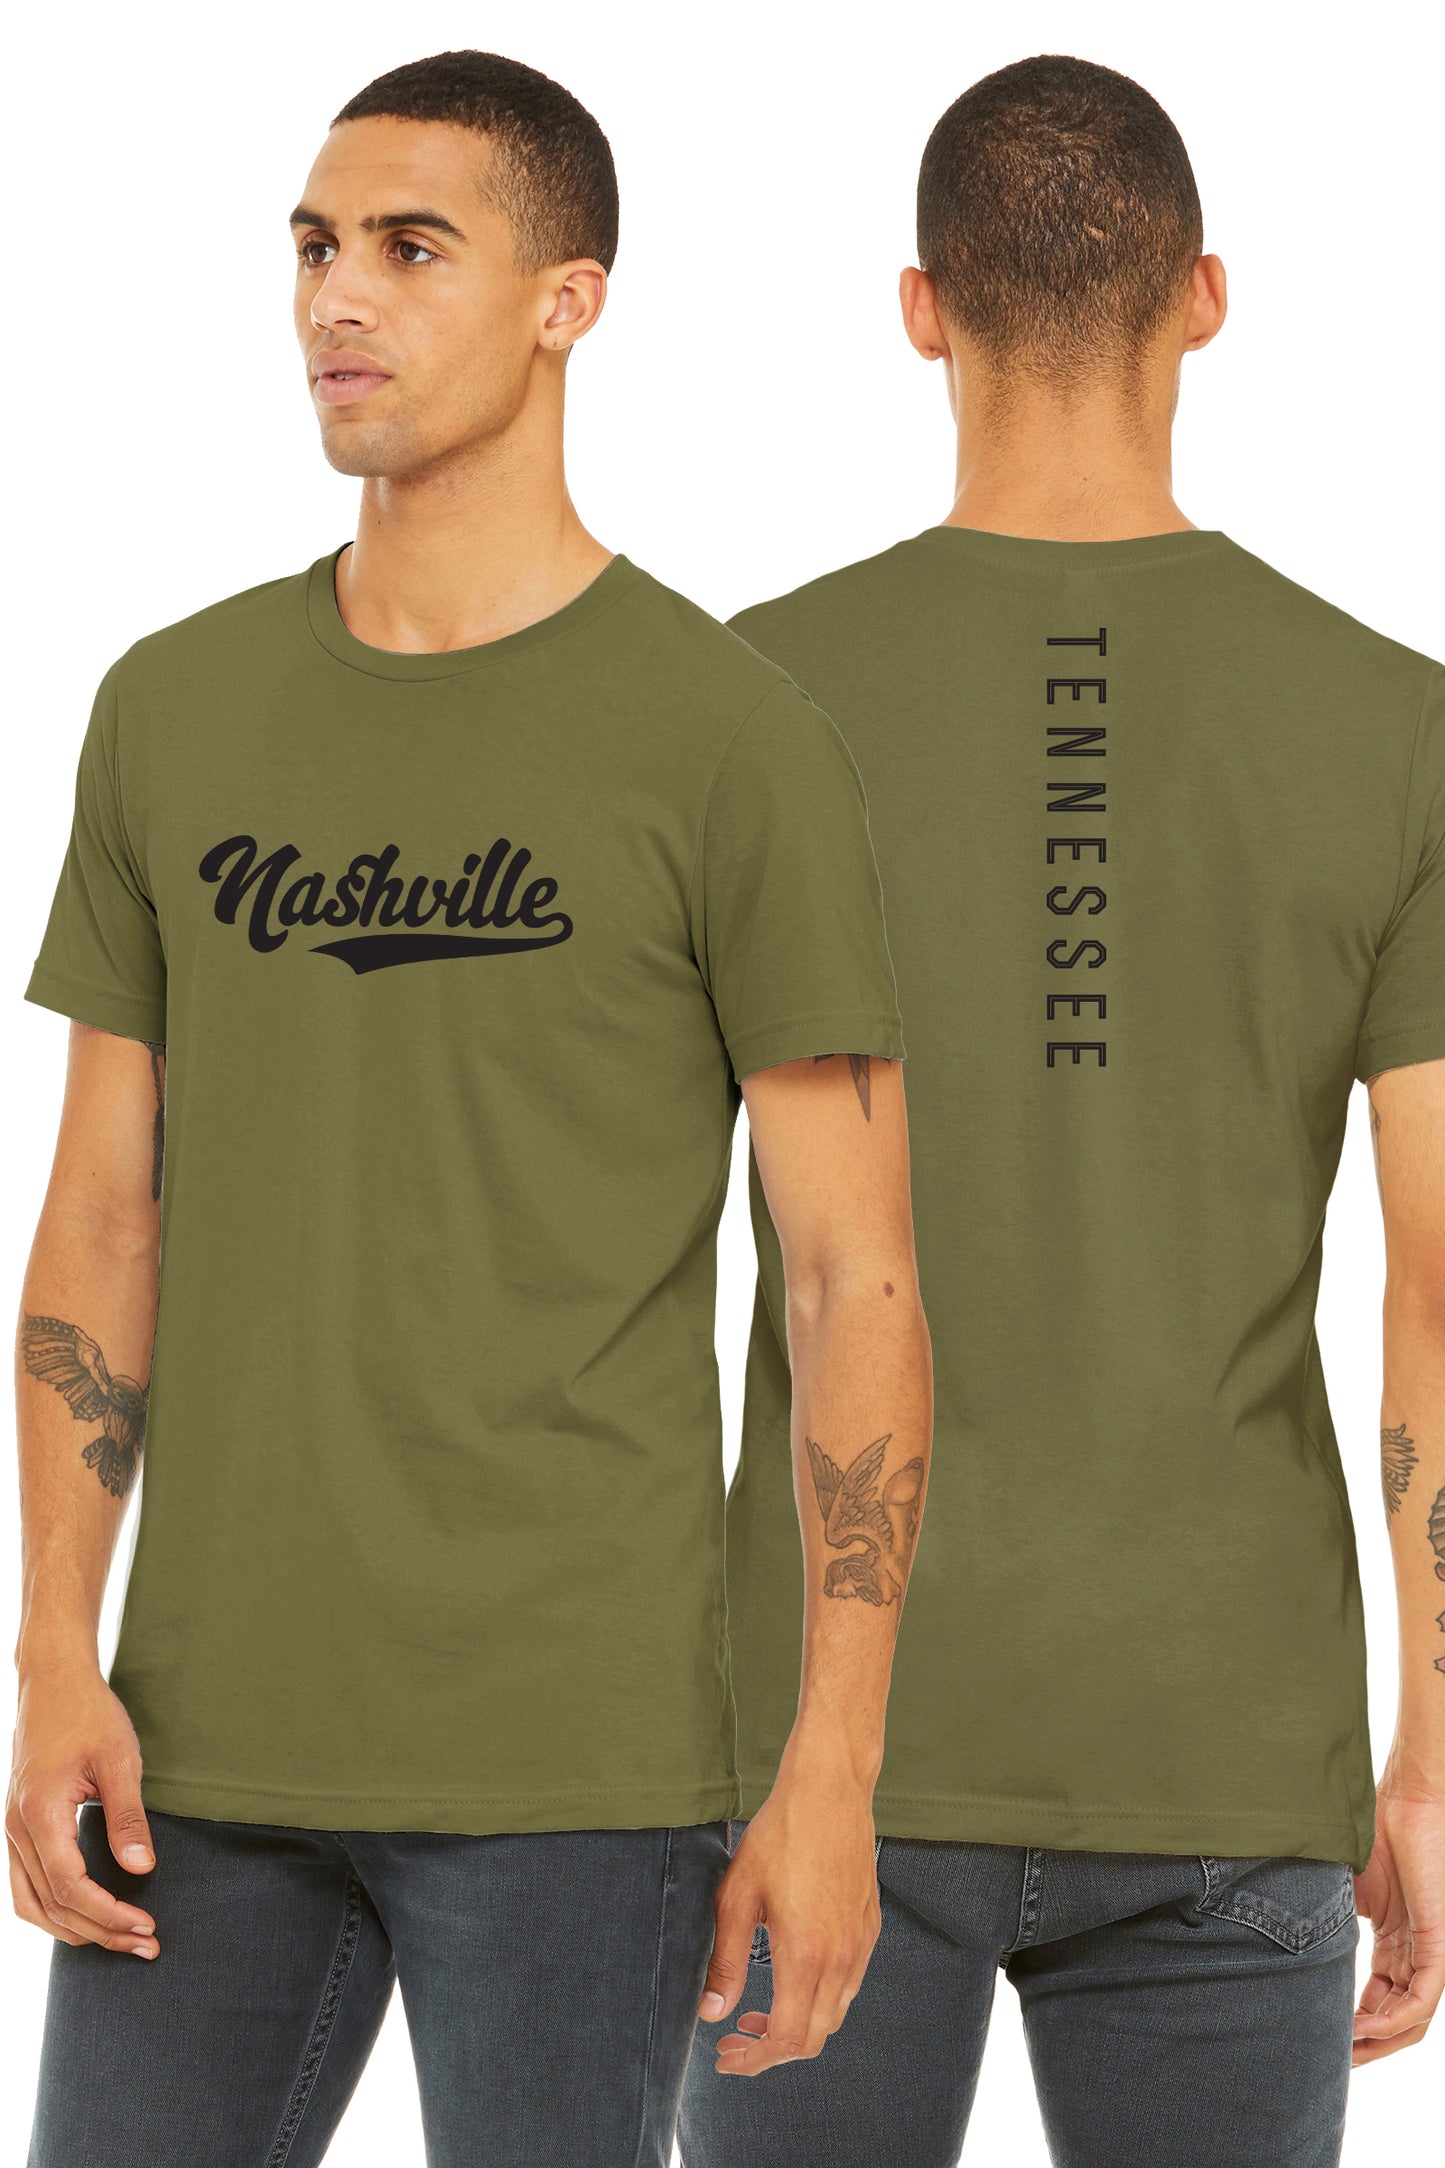 Daxton Adult Unisex Tshirt Nashville Script with Tennessee Vertical on the Back